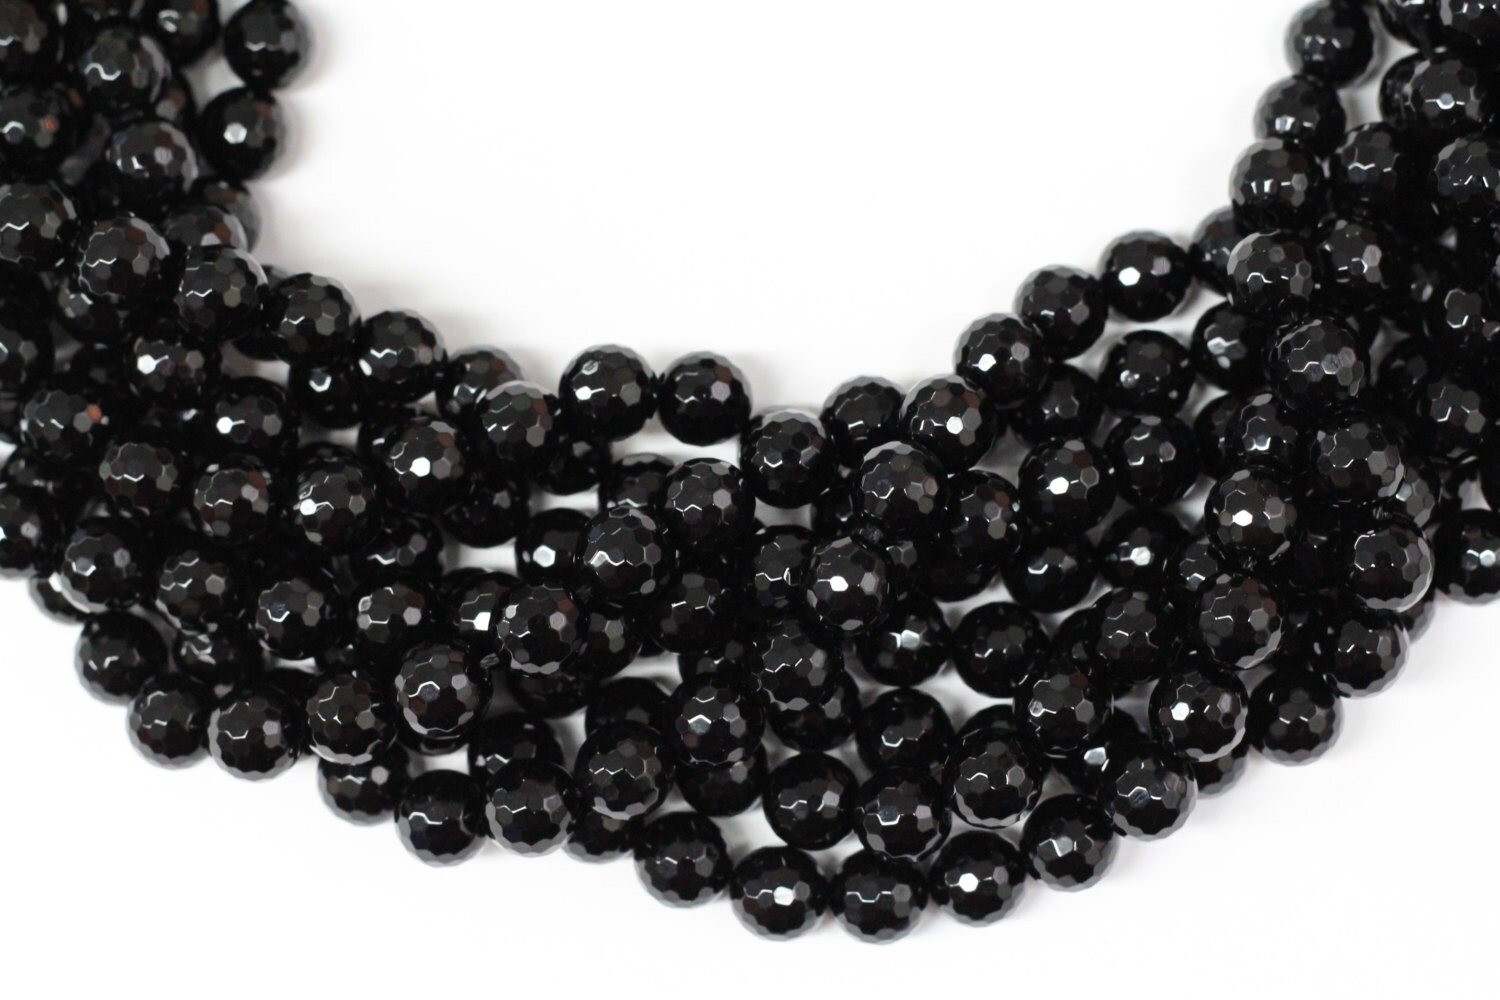 Black Onyx 10mm faceted round beads 16 length strand